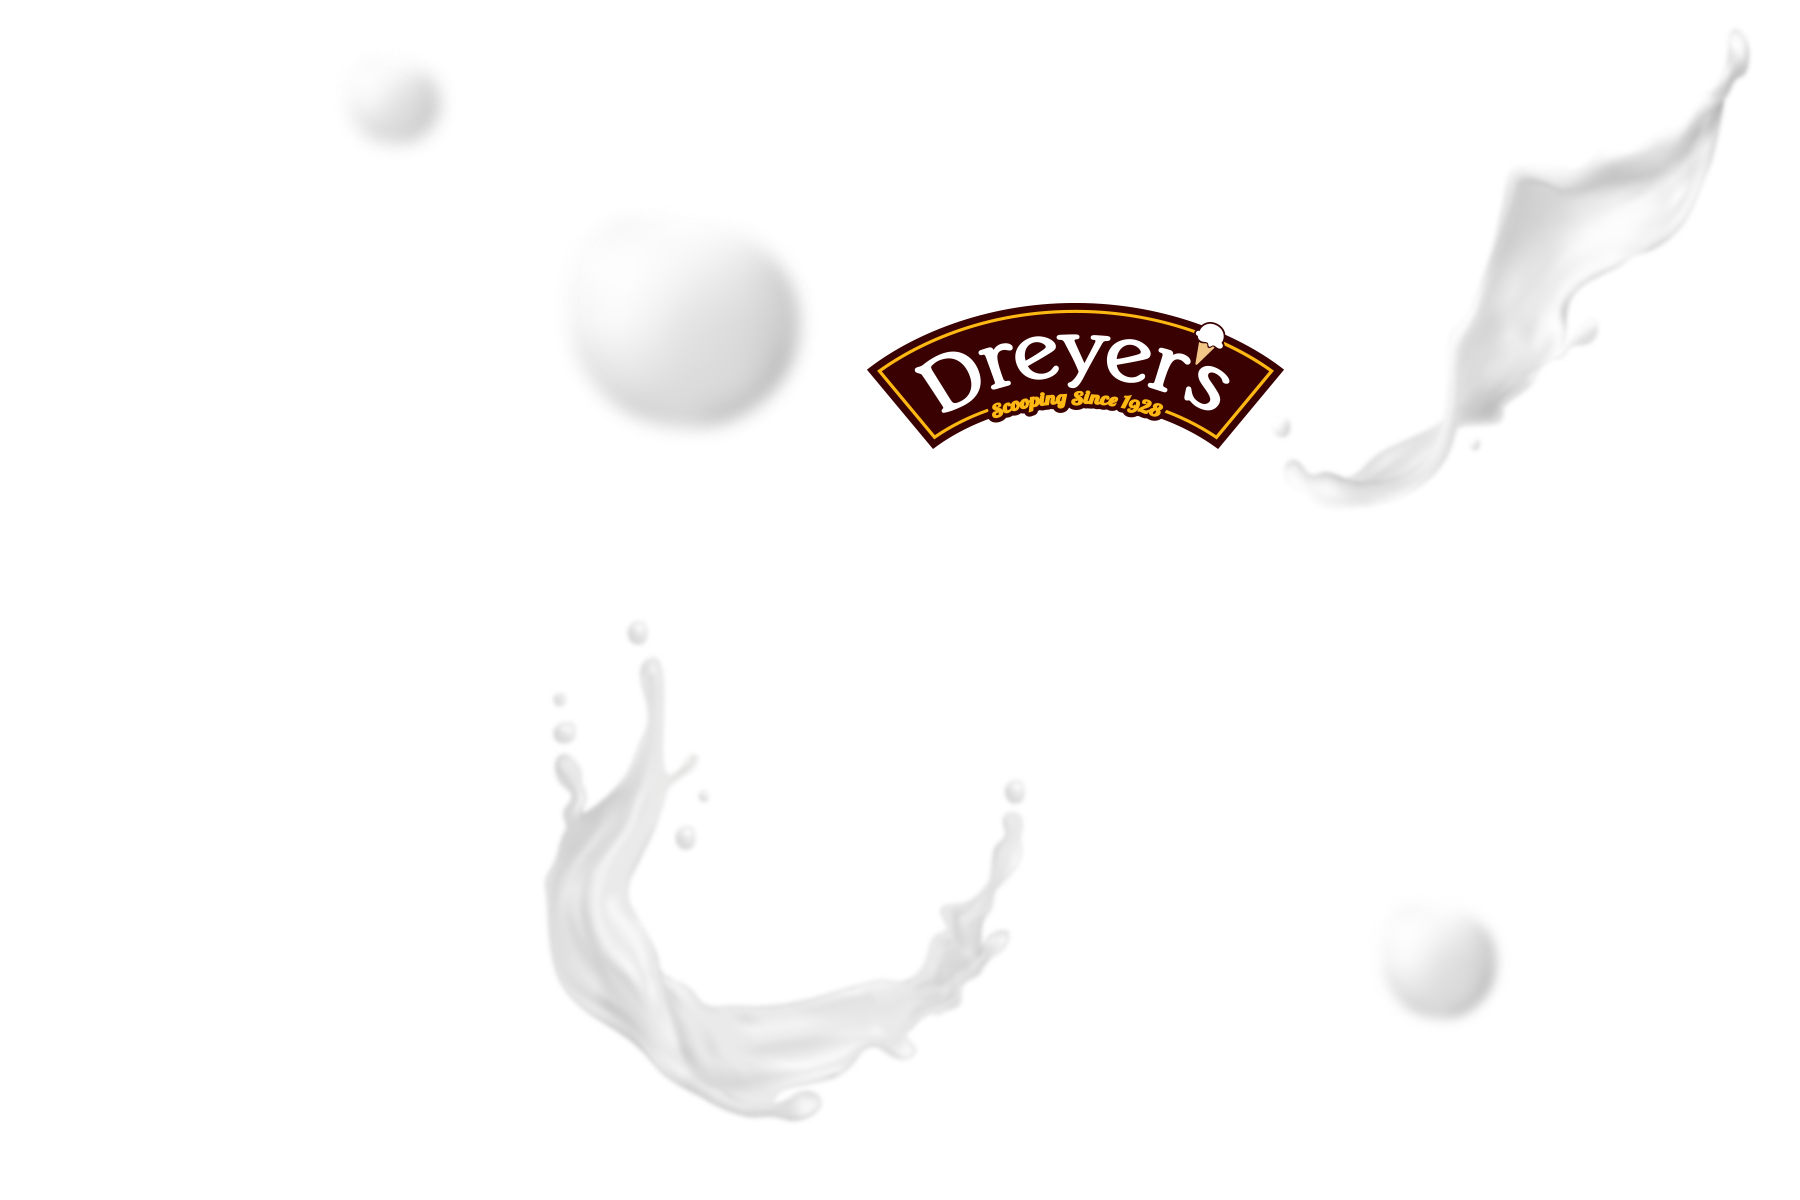 axent communications-dreyers-1